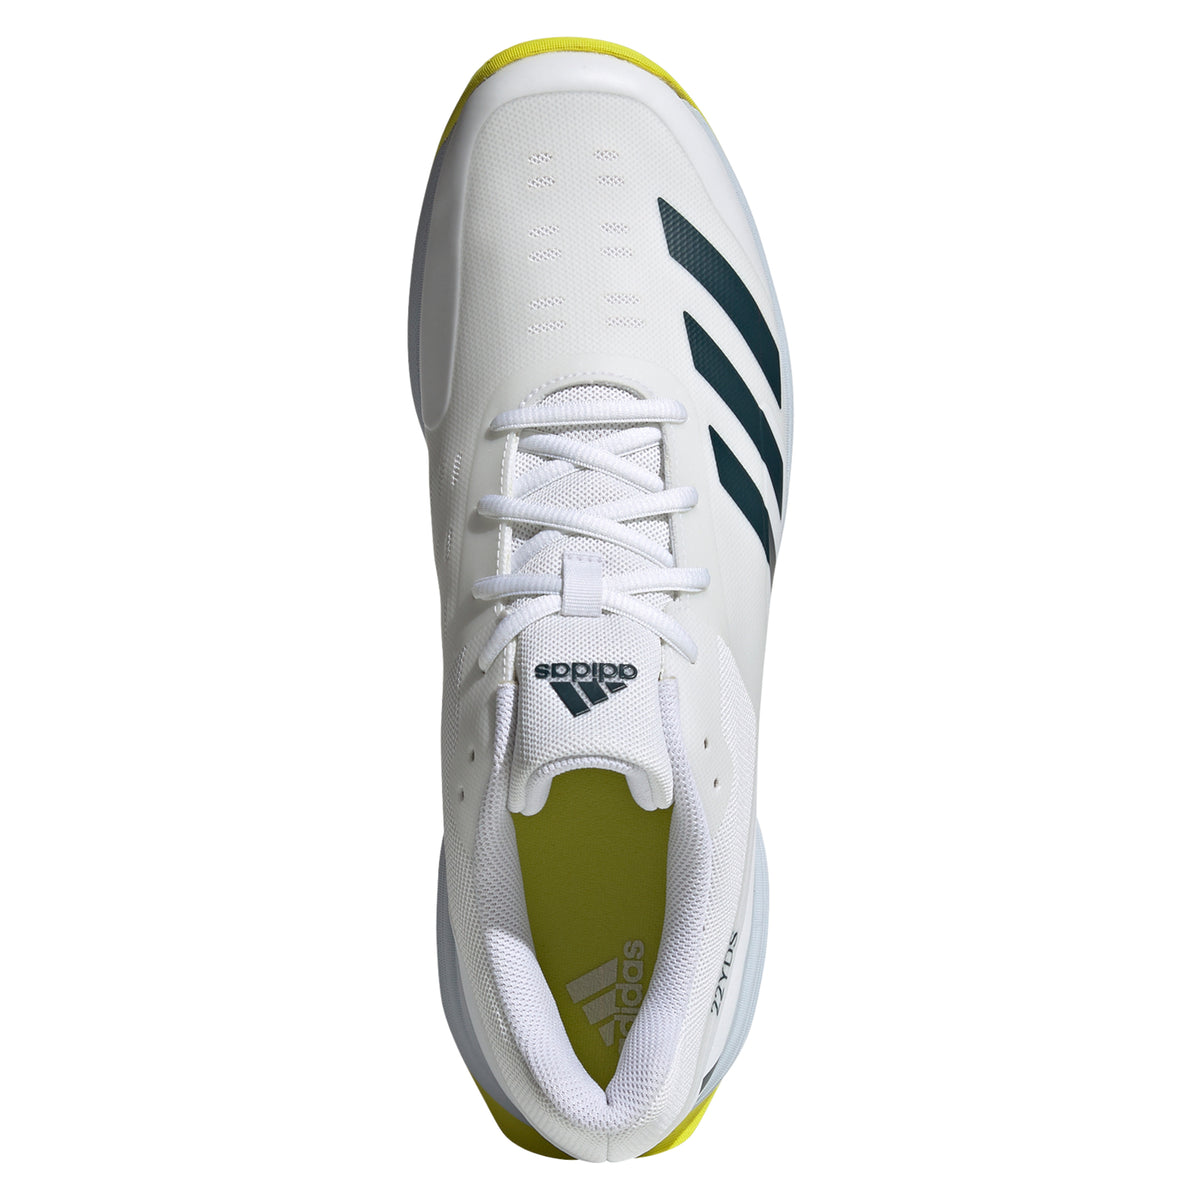 Adidas 22YDS Spike Adult Cricket Shoes